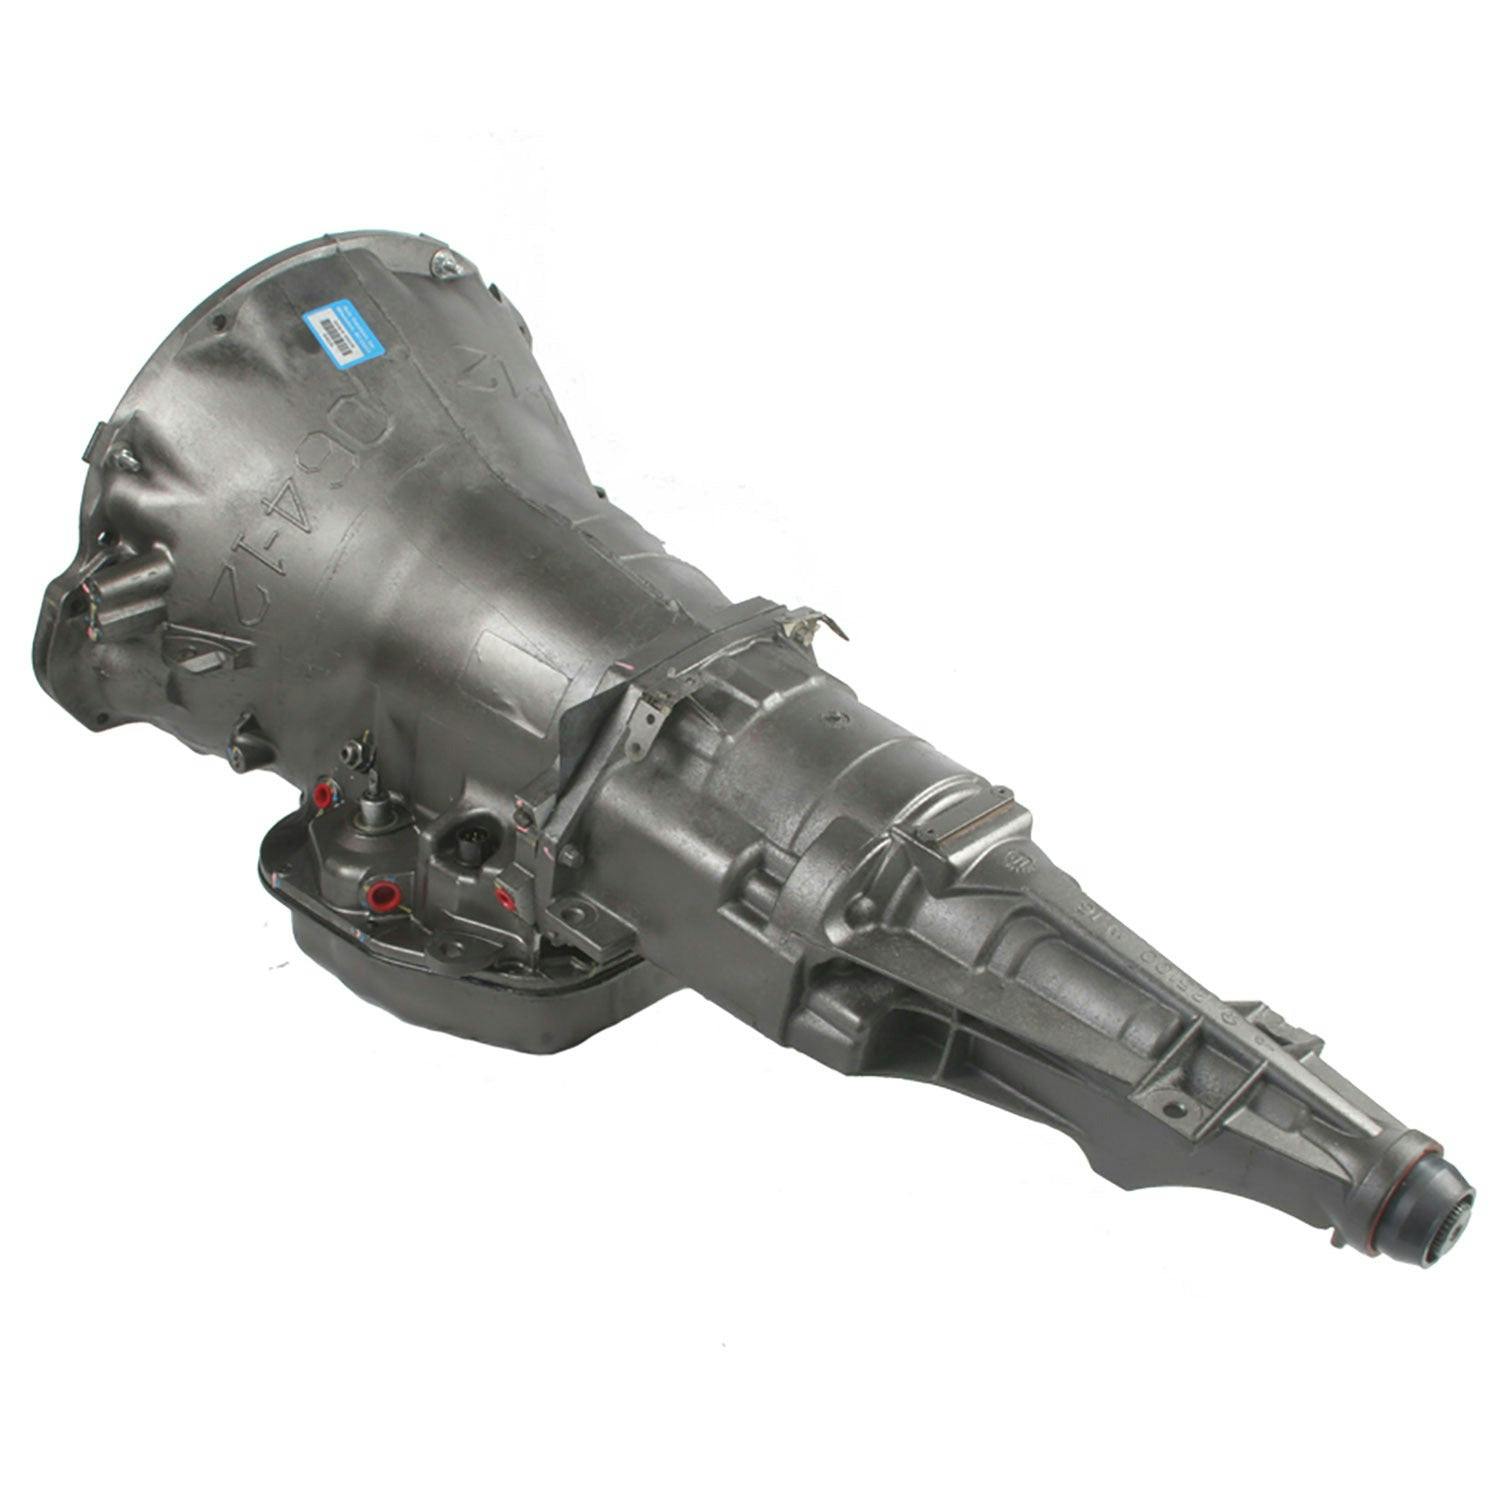 Automatic Transmission for 1998 Jeep Grand Cherokee 4WD with 5.9L V8 Engine